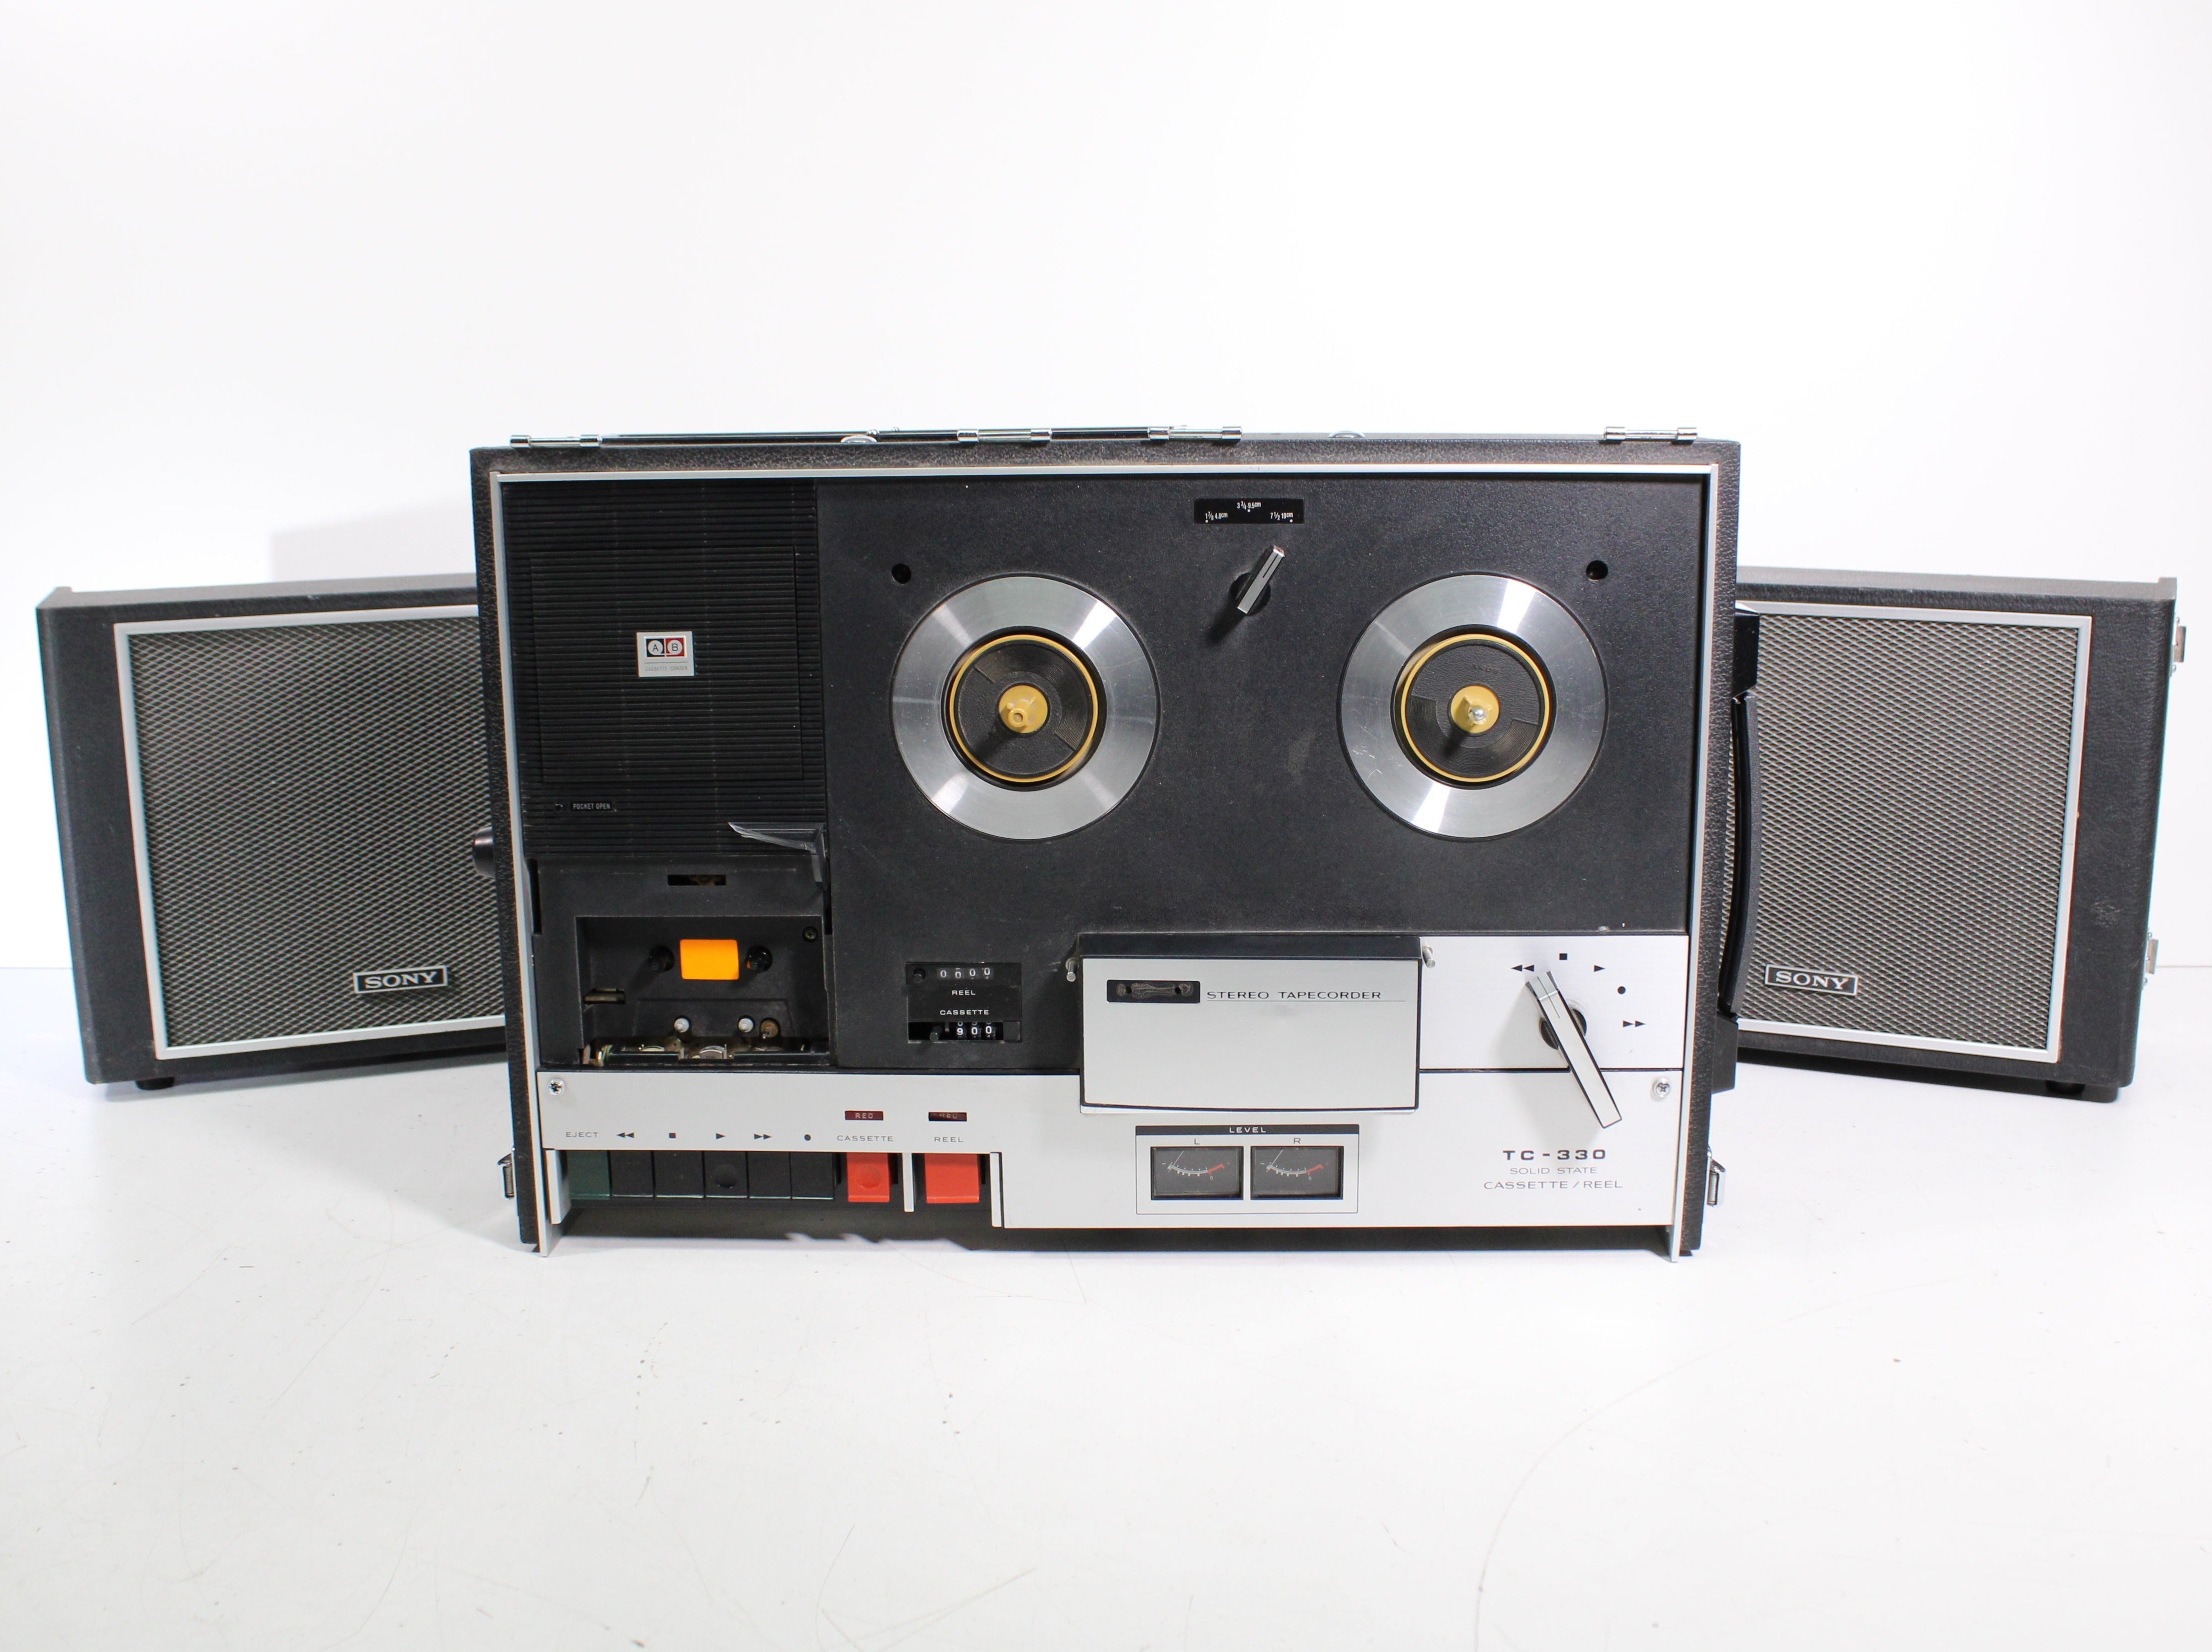 Sony TC-330 Reel-to-Reel and Cassette Player Tapecorder with Detachabl